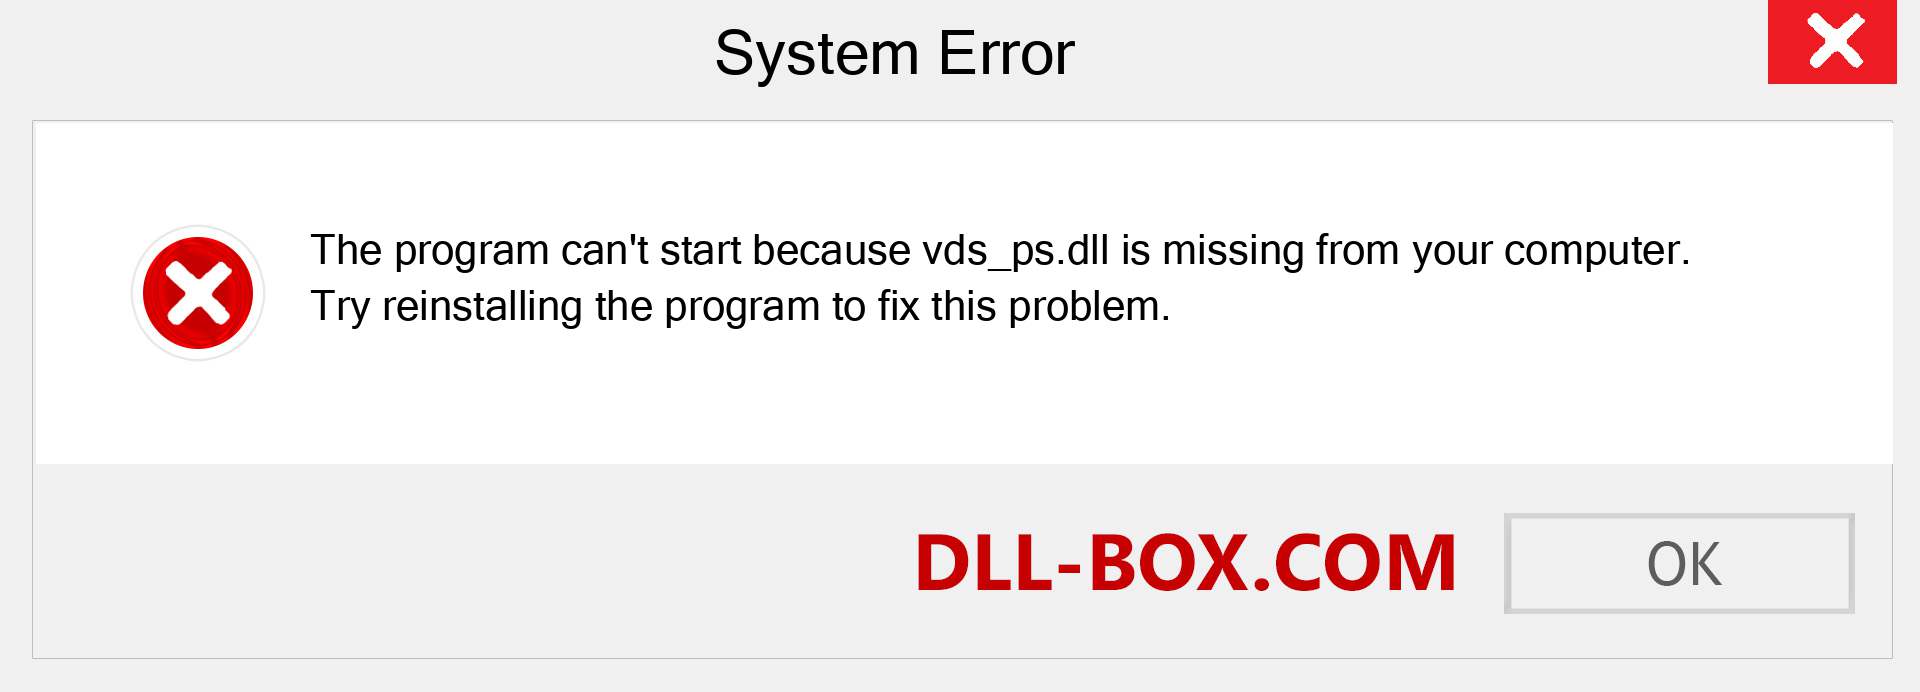  vds_ps.dll file is missing?. Download for Windows 7, 8, 10 - Fix  vds_ps dll Missing Error on Windows, photos, images